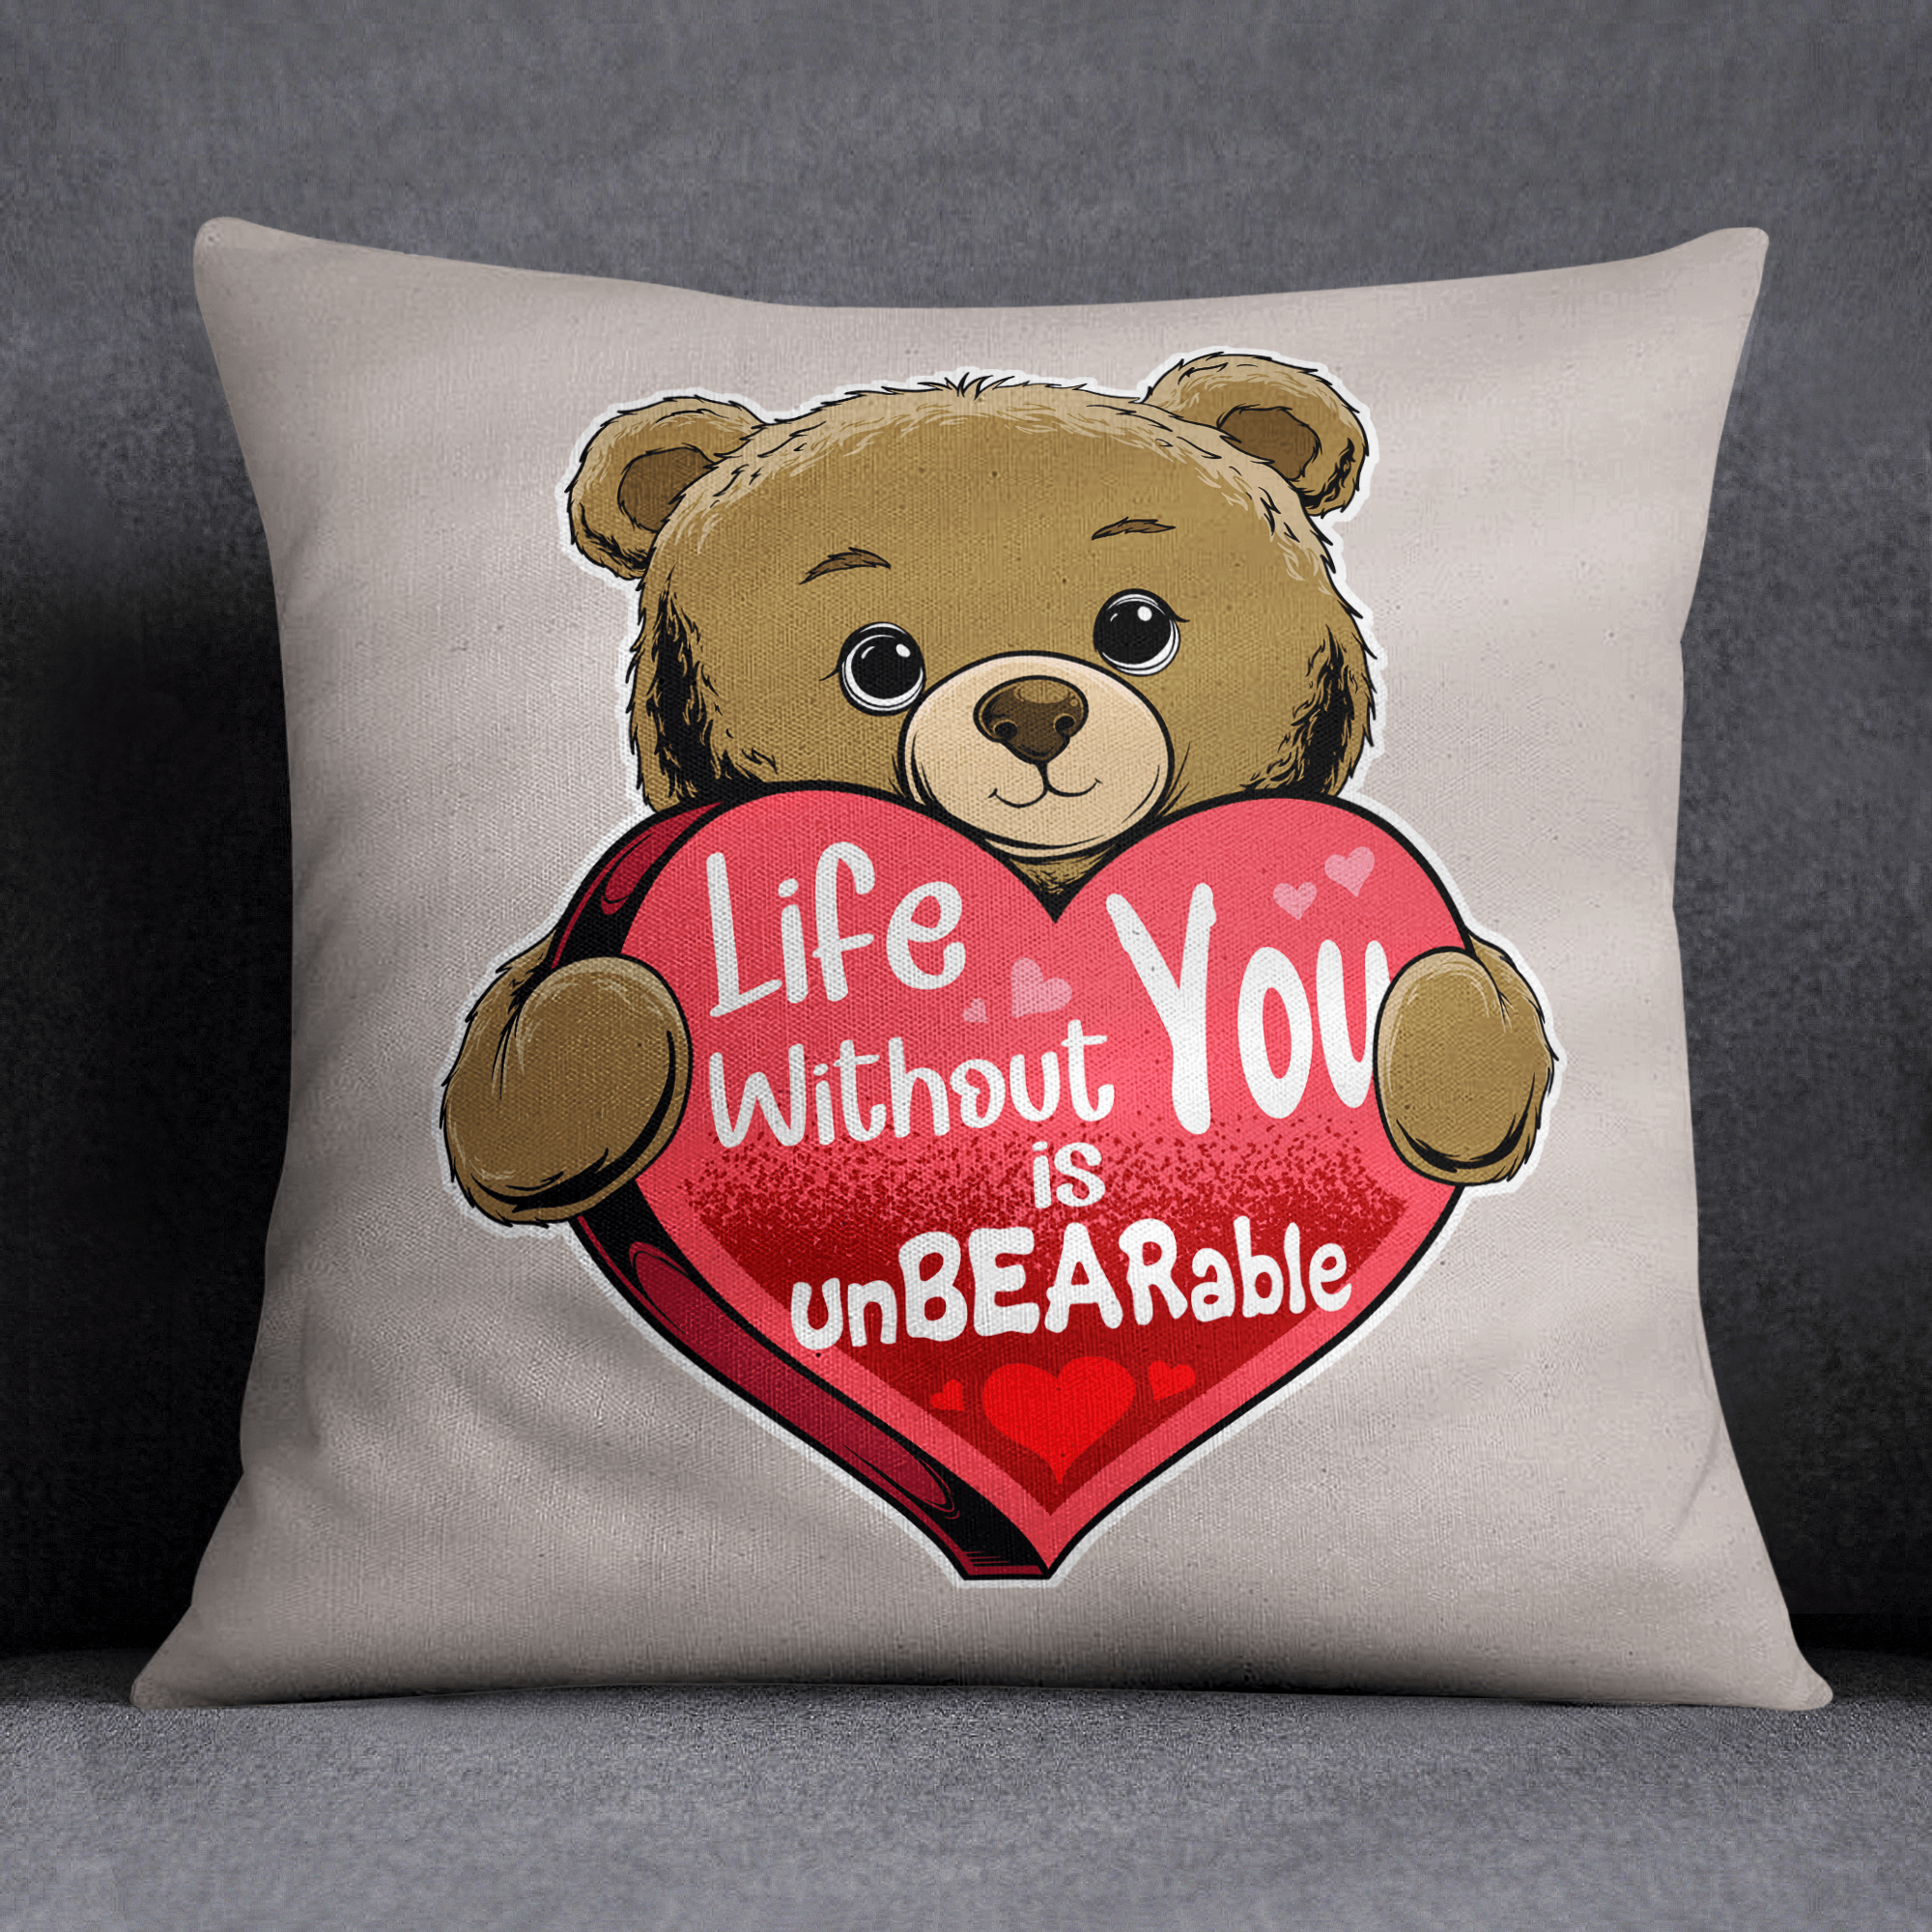 Life Without You Is UnBEARable Pillow - Valentine's day Gift for someone special